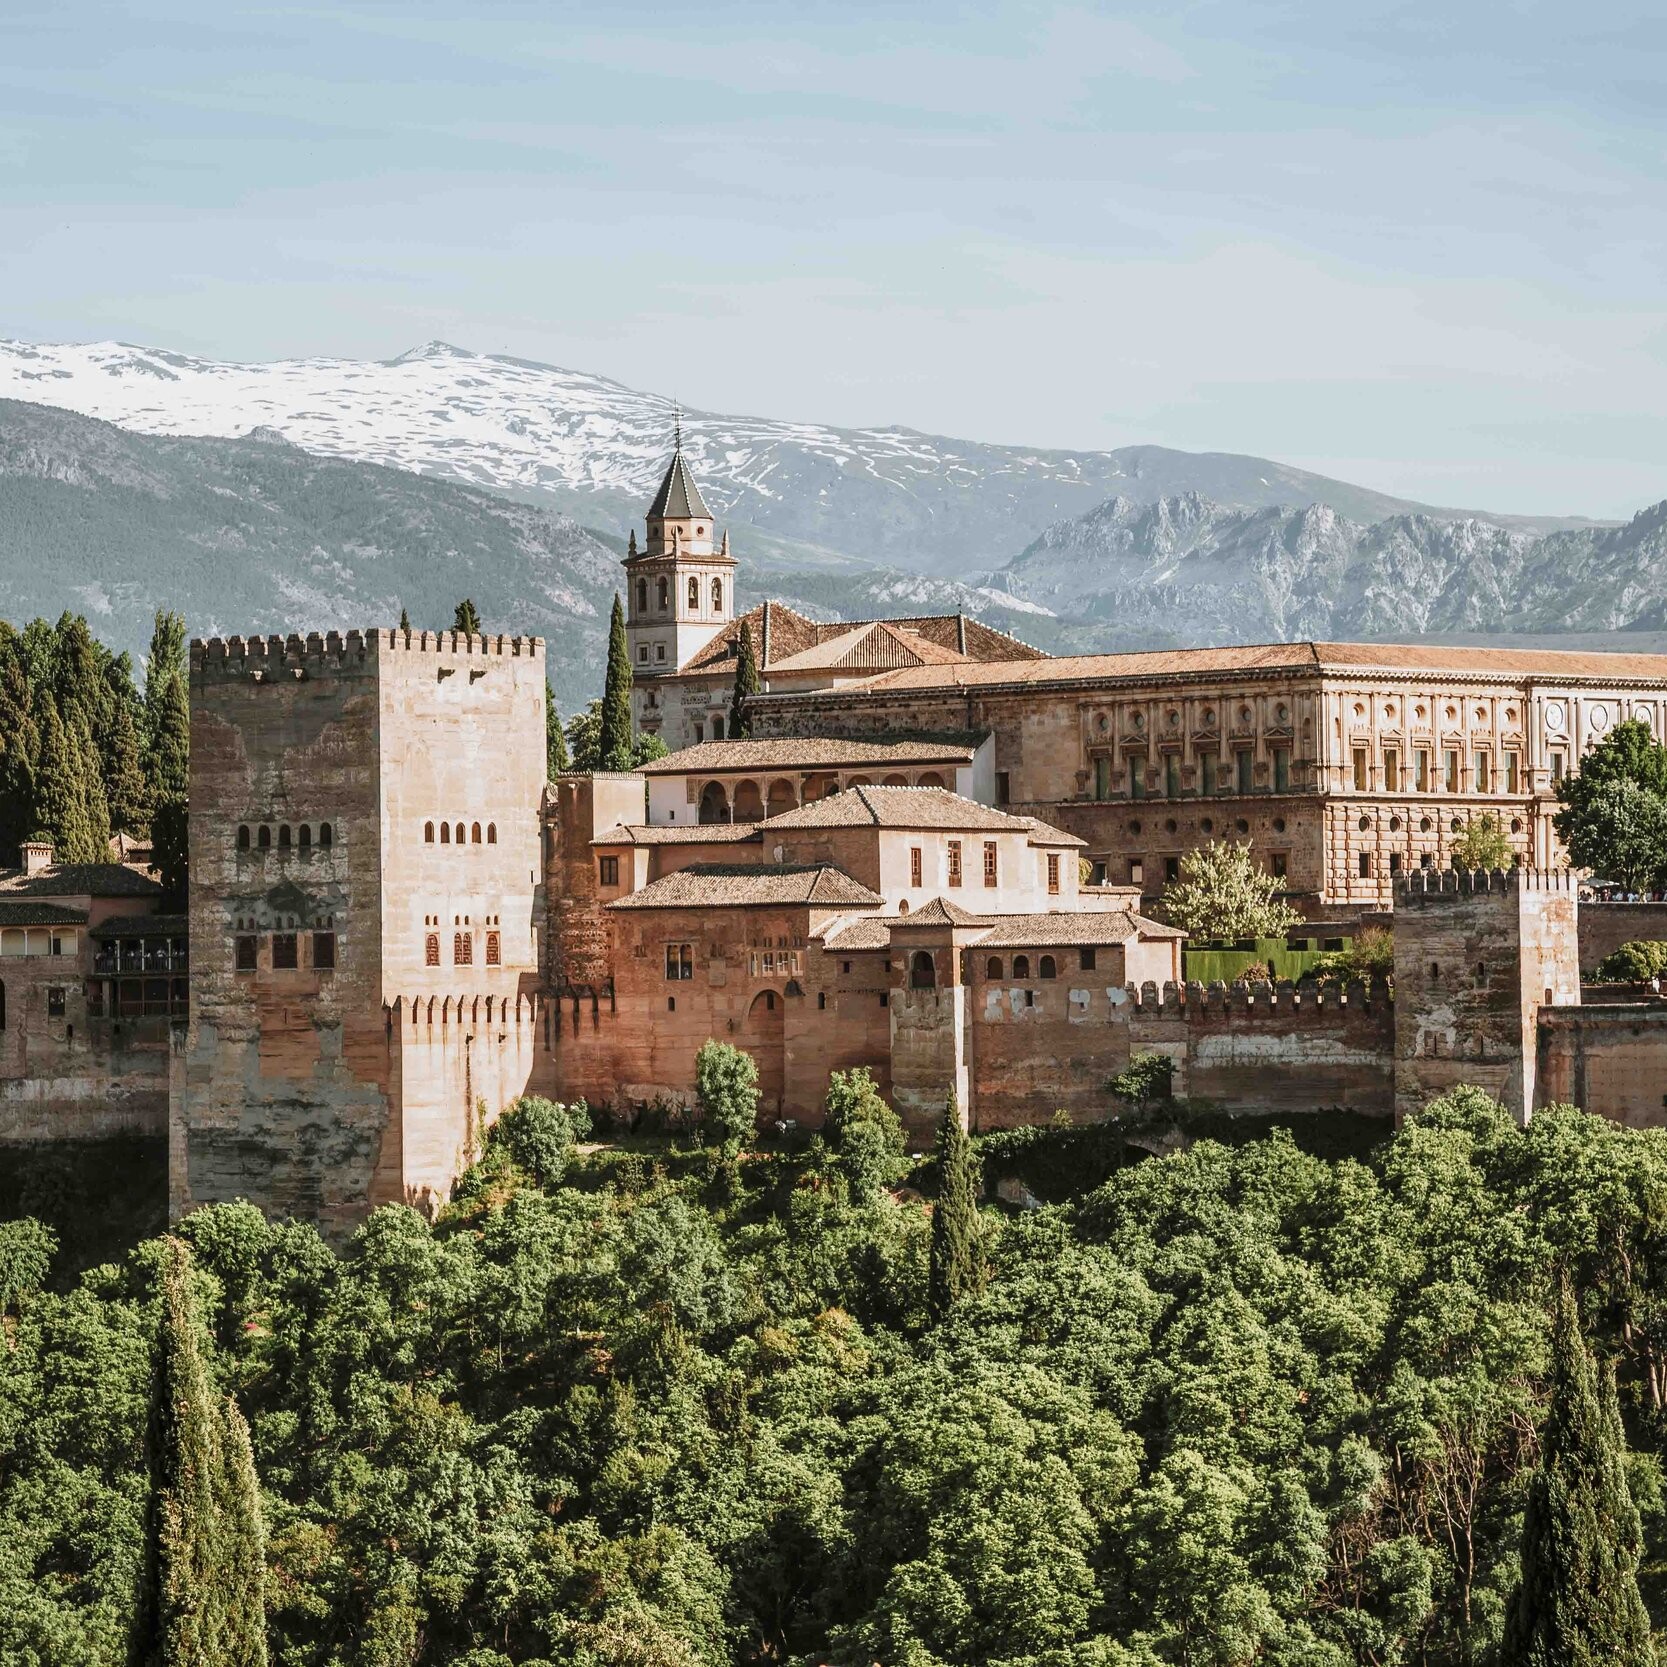 The Alhambra during the day with hills in the back